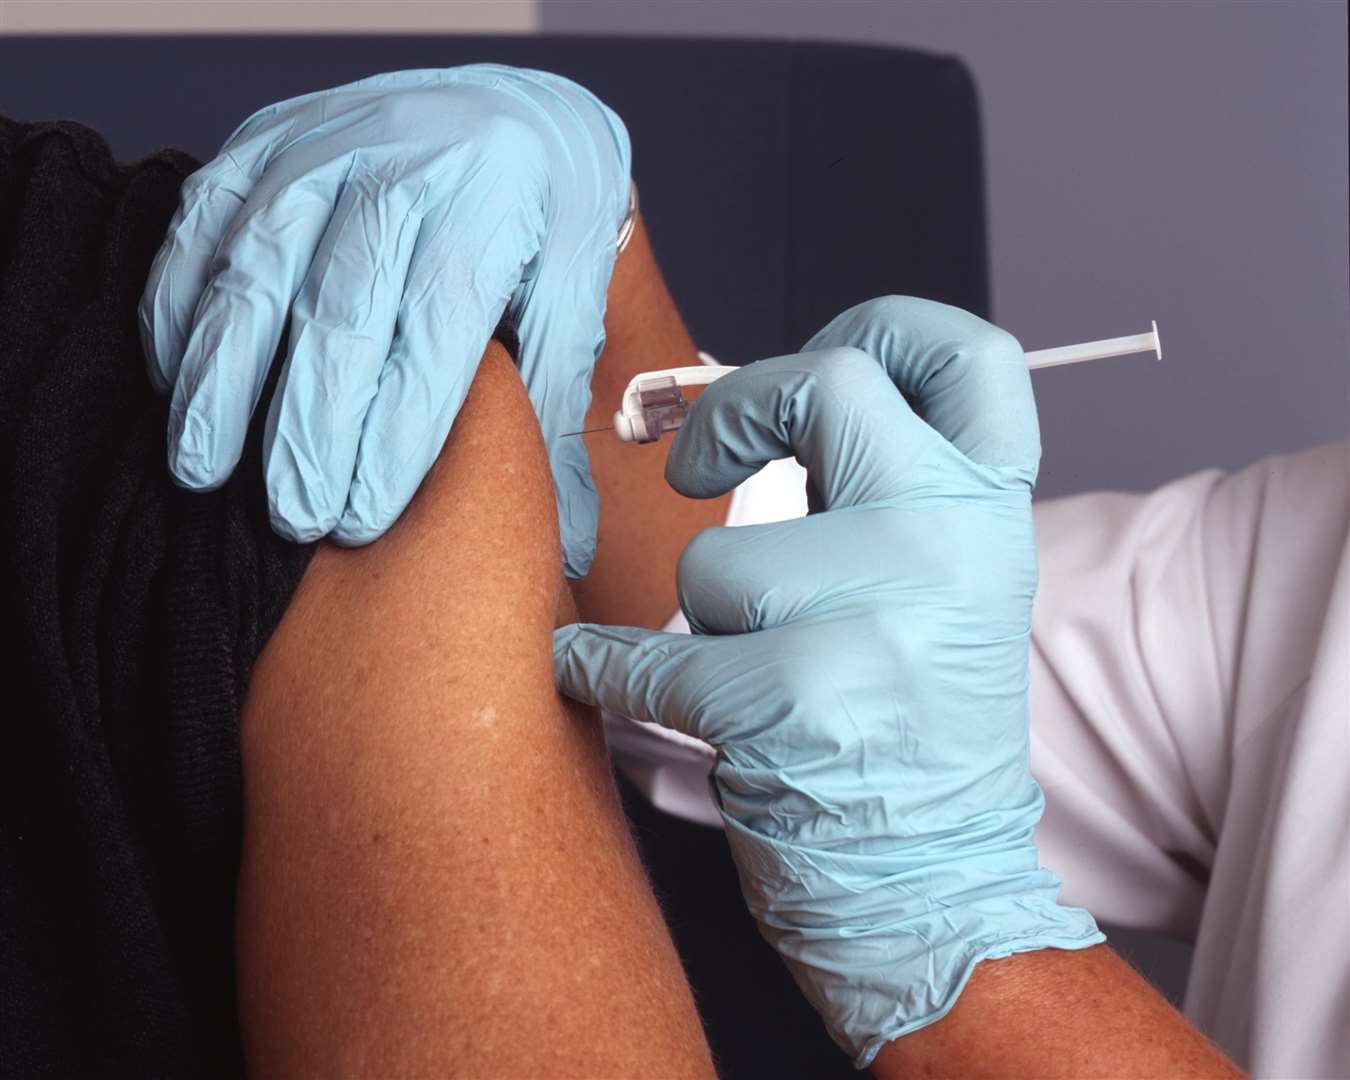 Higher demand on vaccine staff is said to behind slower than hoped vaccine roll out in Medway